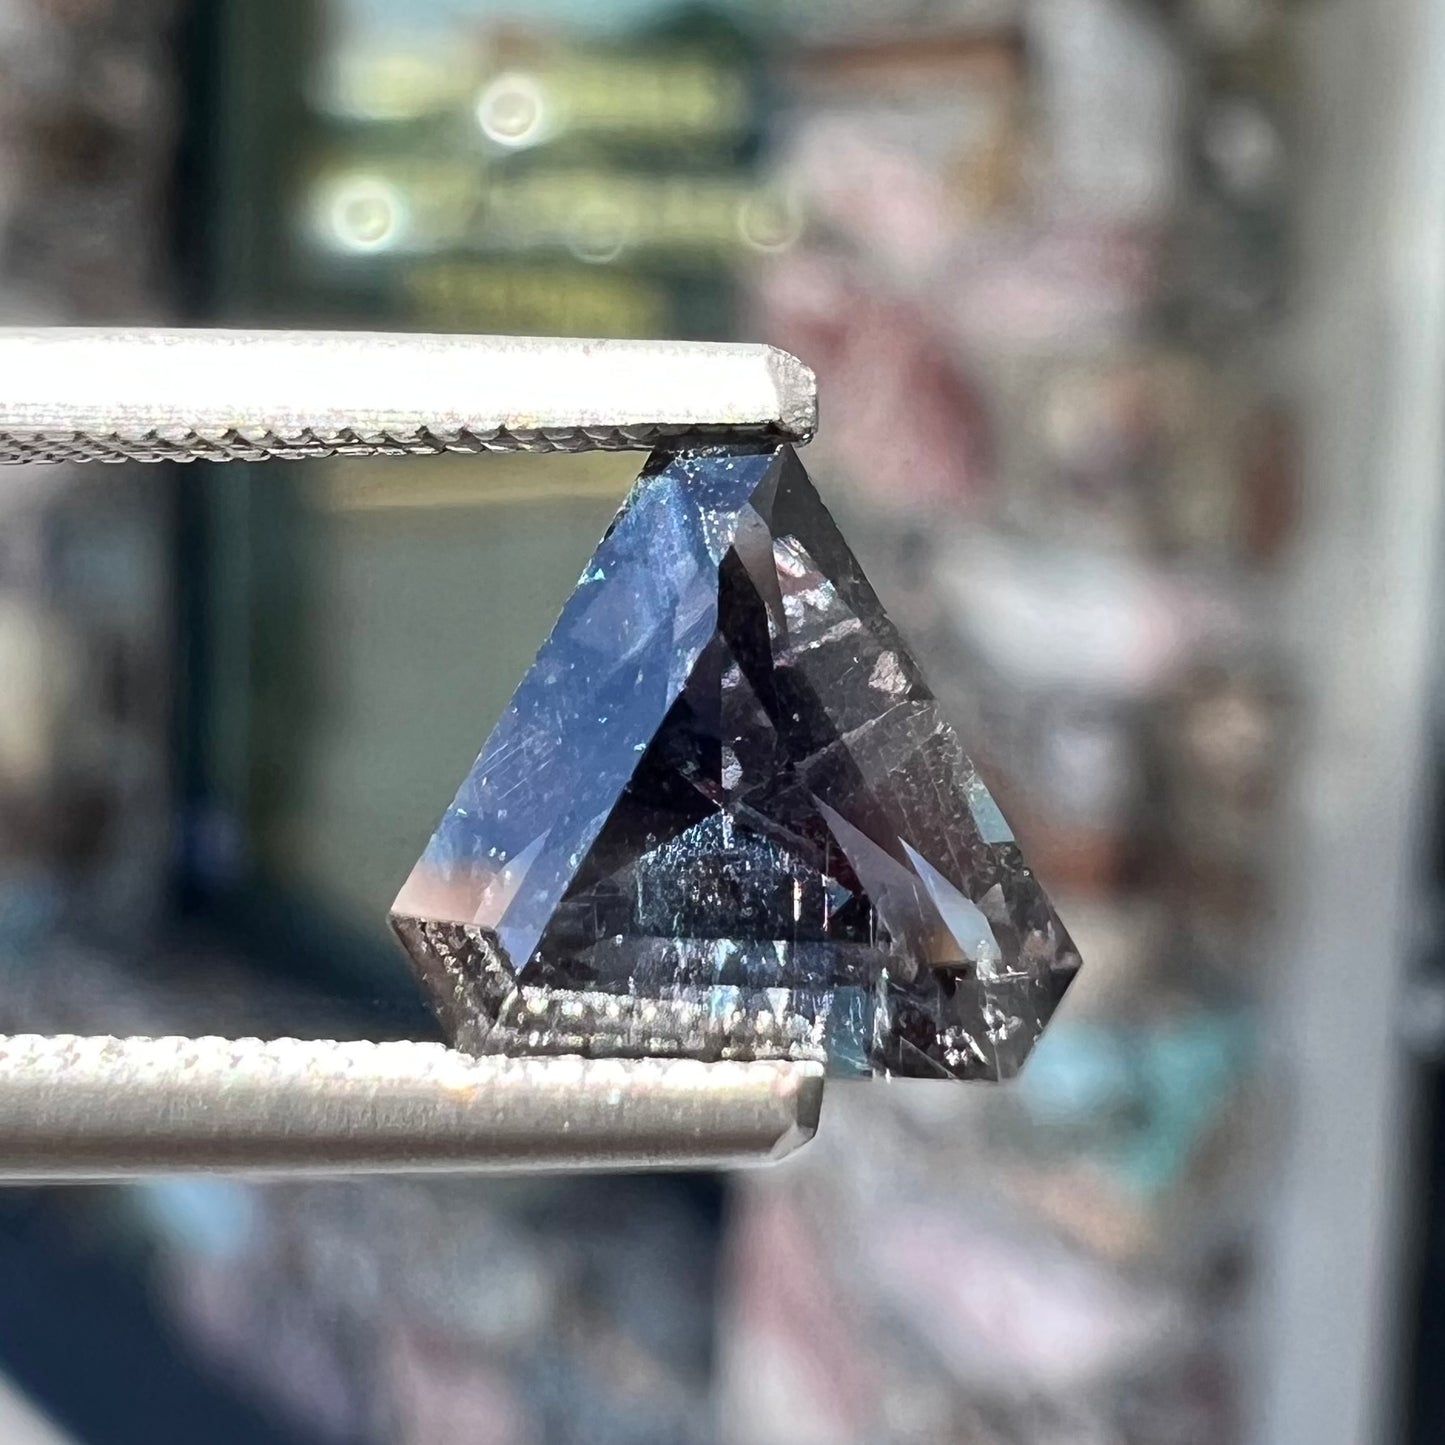 A loose, modified triangle cut parti sapphire gemstone.  The sapphire shows colors of blue, violet, purple, and gray.